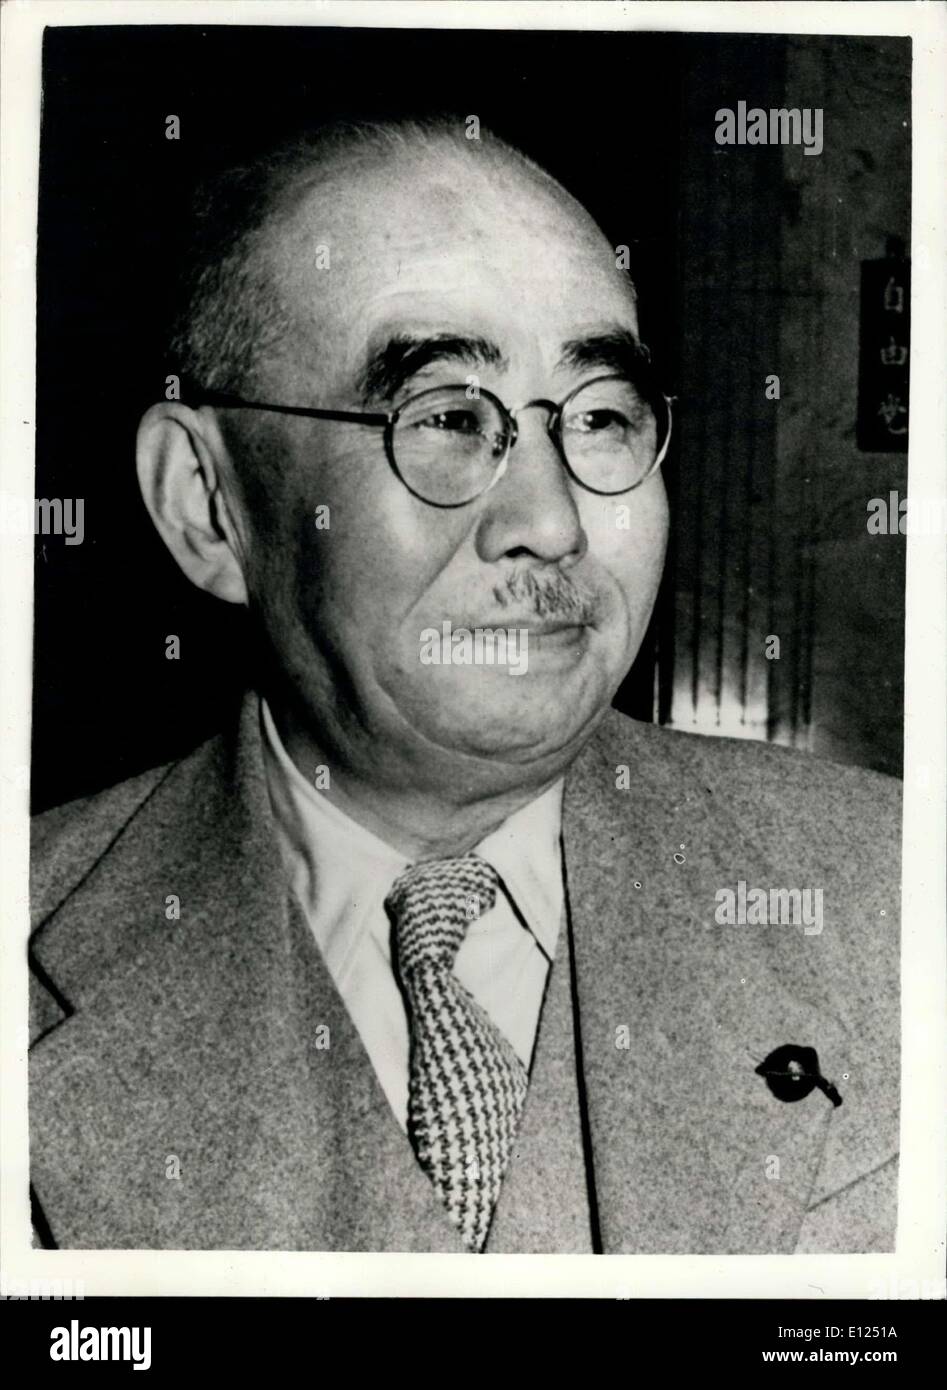 Dec. 20, 1986 - Japan's new Premier.: Photo shows Mr. Tanzan Ishibashi, is pictured after his election as new President of the ruling Literal-Democratic Party, which automatically means the Premiership- at the Party's national convention in Tokyo on Dec. 14. Mr. Ishabashi was International Trade and Industry Minister under the retired Premier Hatoyama. Stock Photo